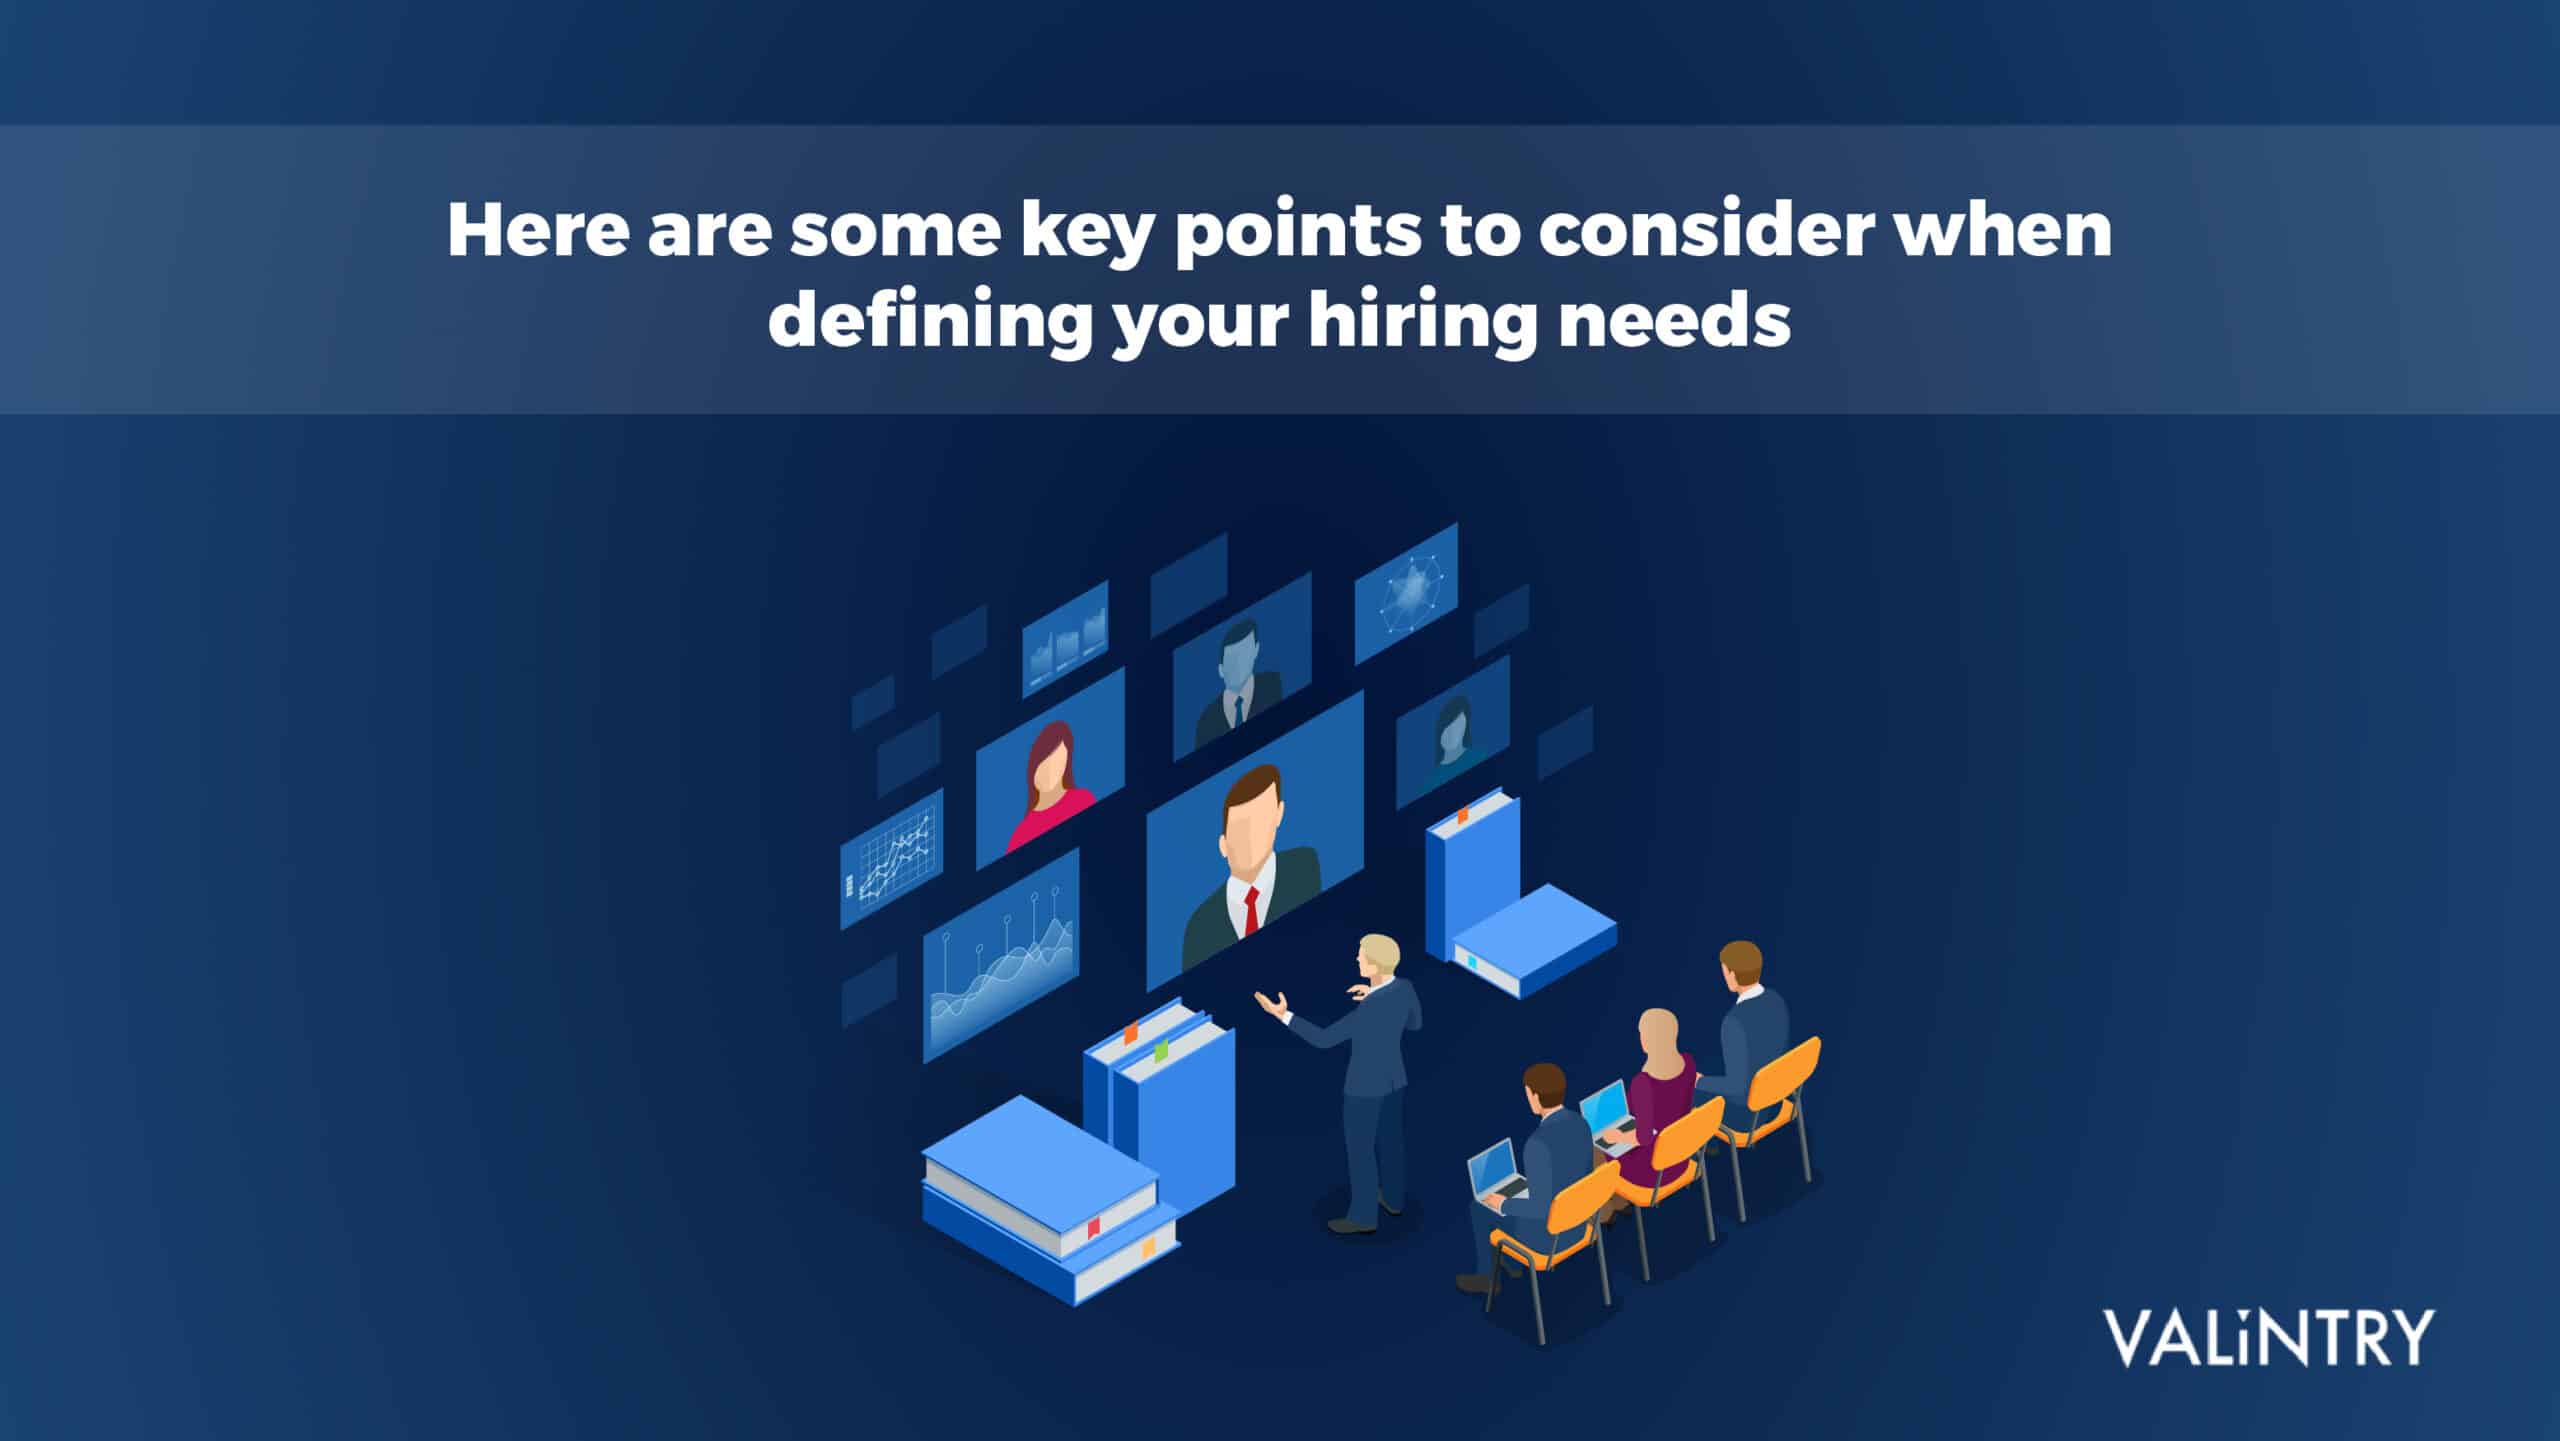 Here are some key points to consider when defining your hiring needs